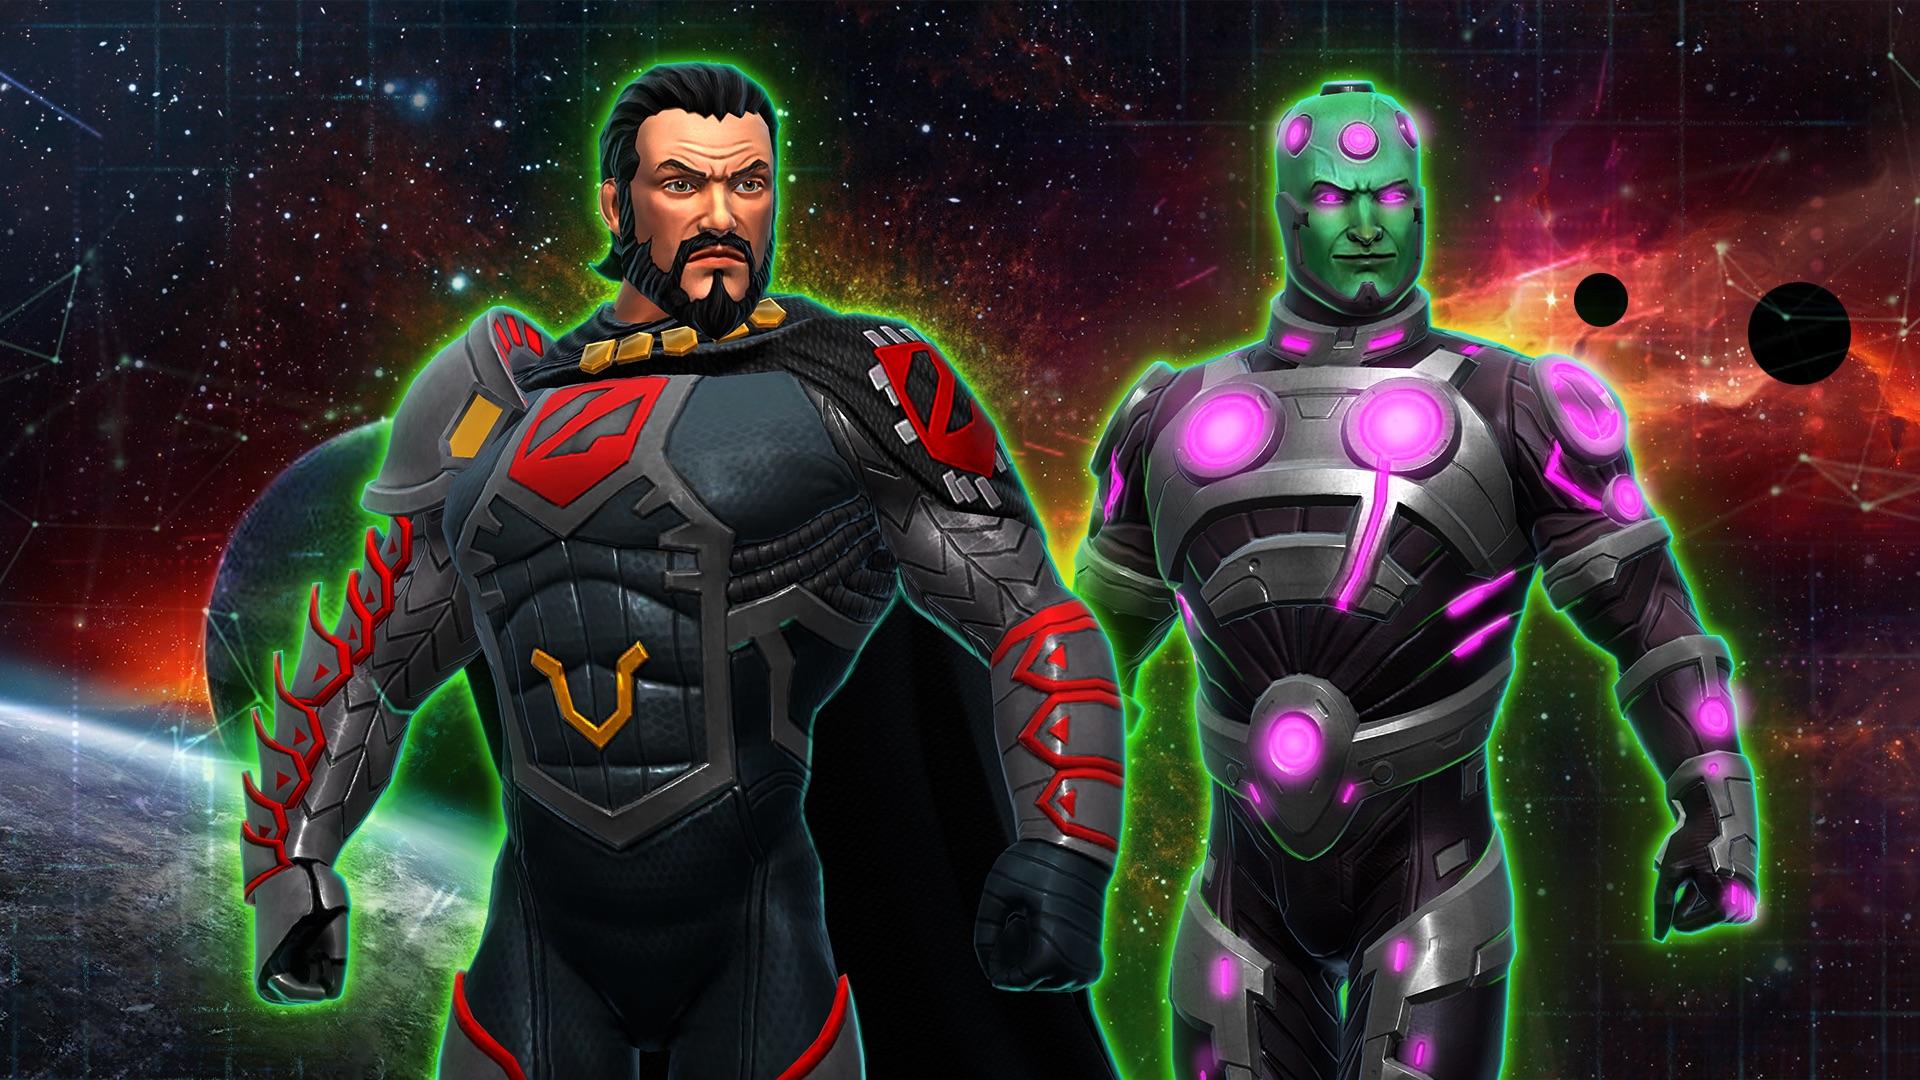 Get ready for a Kryptonian November with General Zod and Brainiac